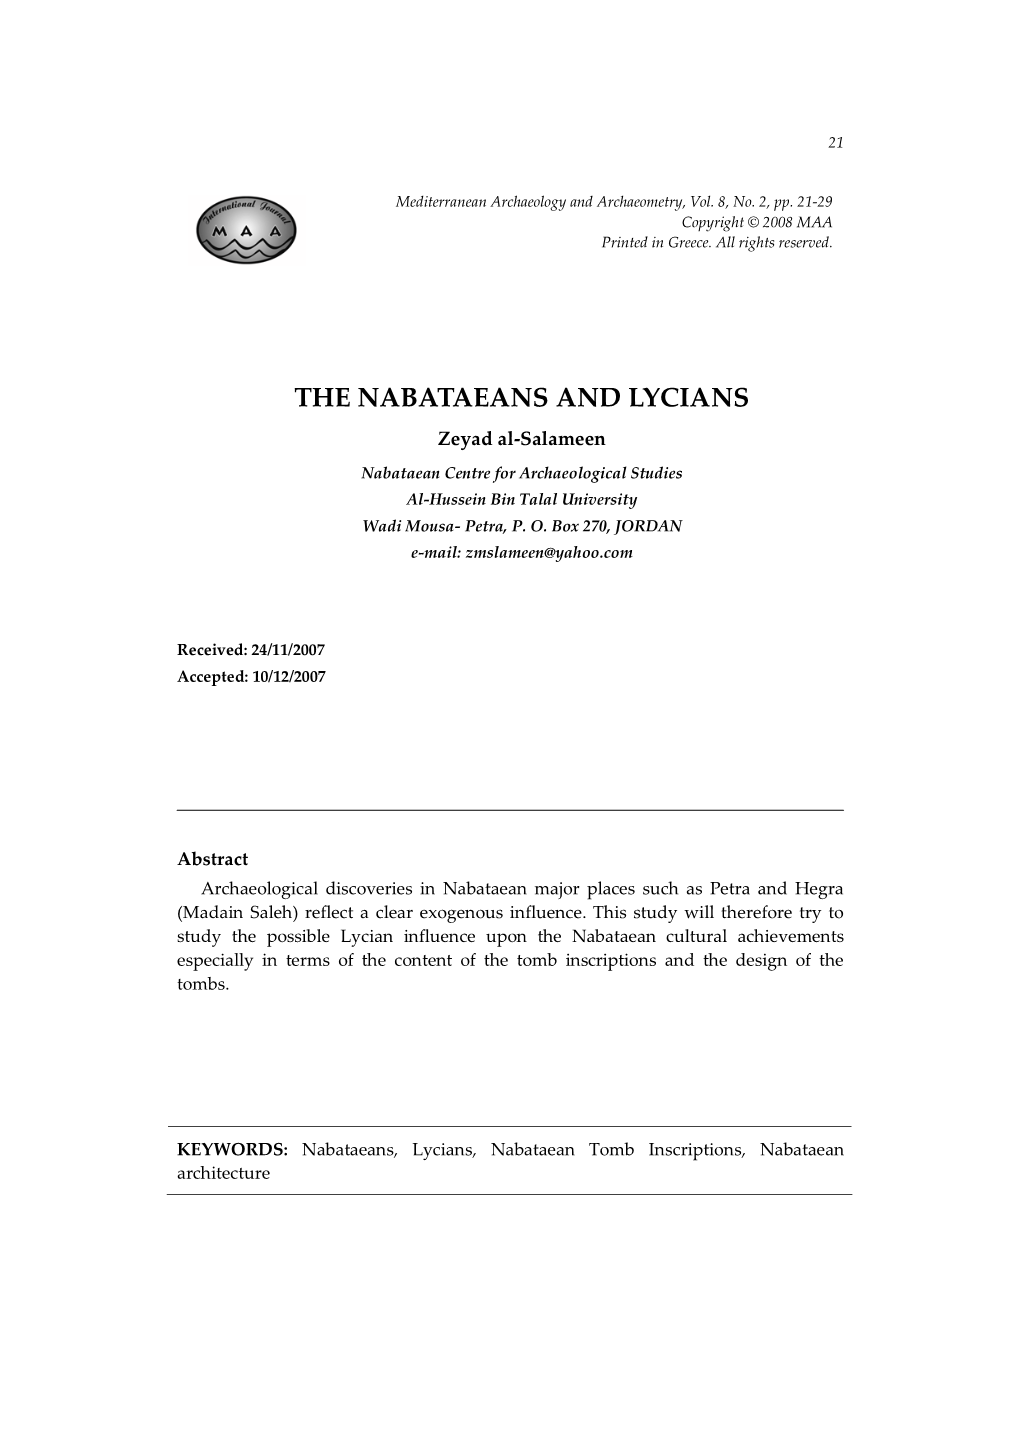 THE NABATAEANS and LYCIANS Zeyad Al-Salameen